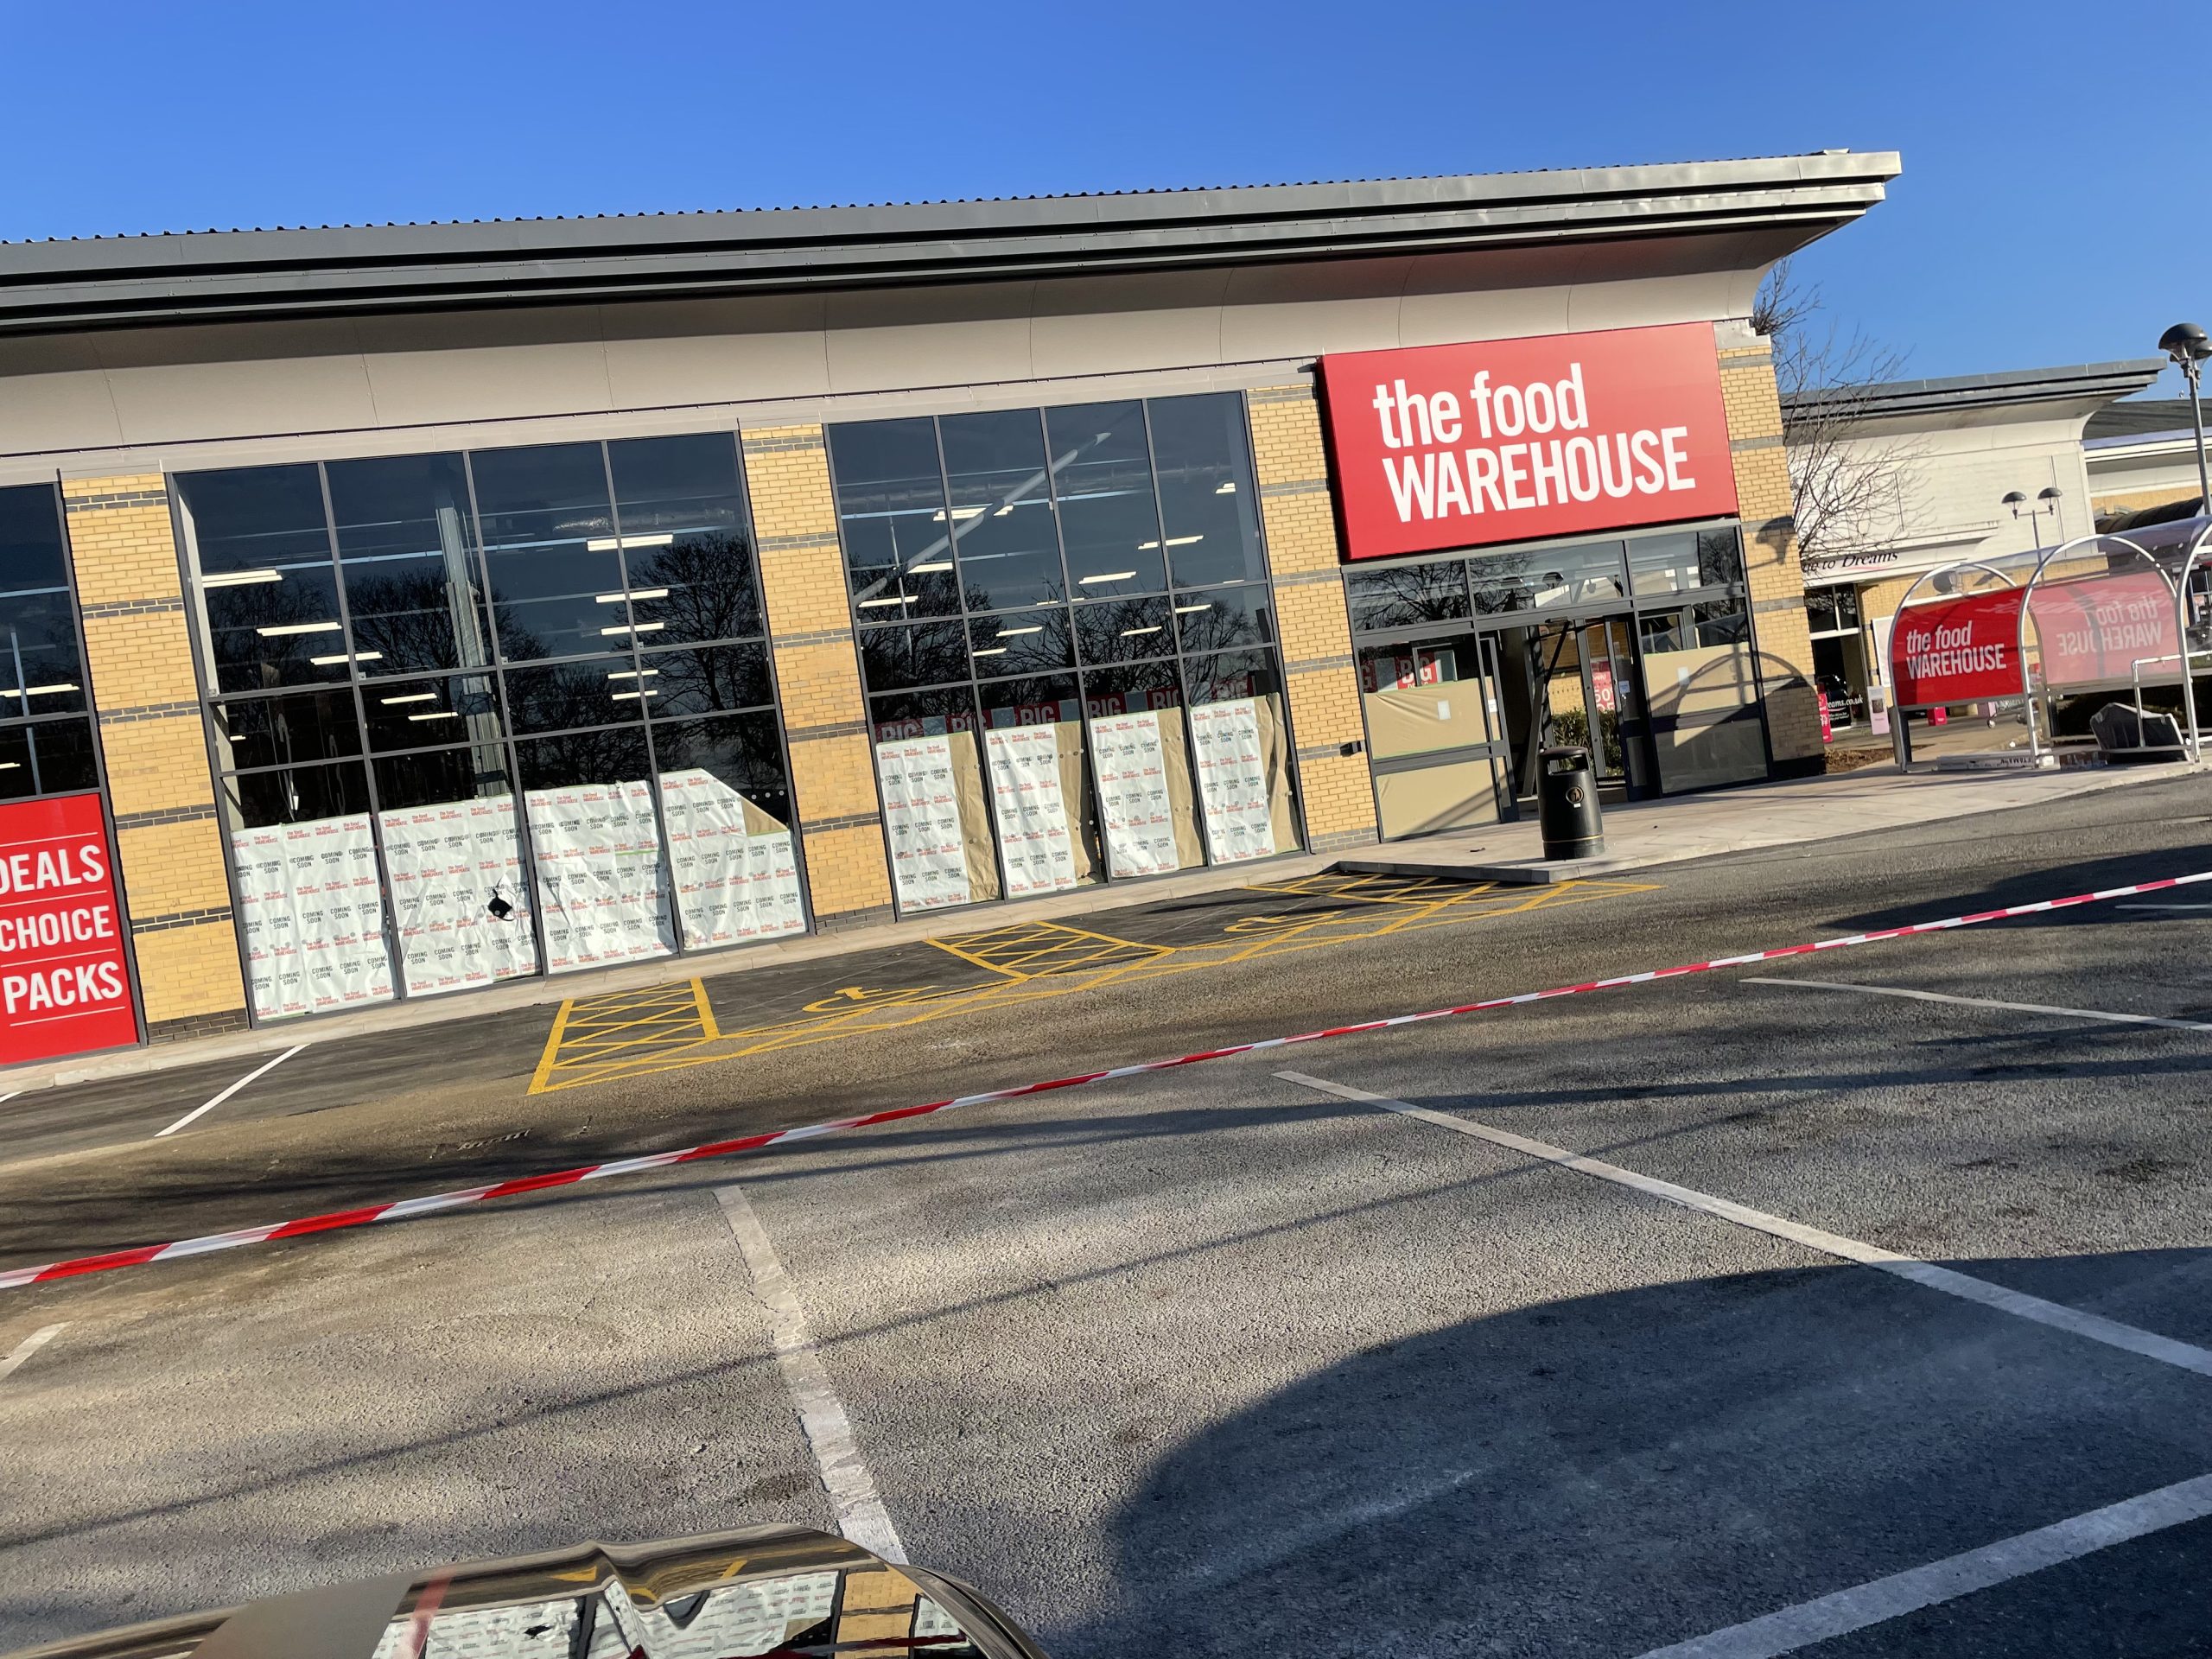 NEWS | Final touches being completed as The Food Warehouse prepares to open store in Hereford later this month